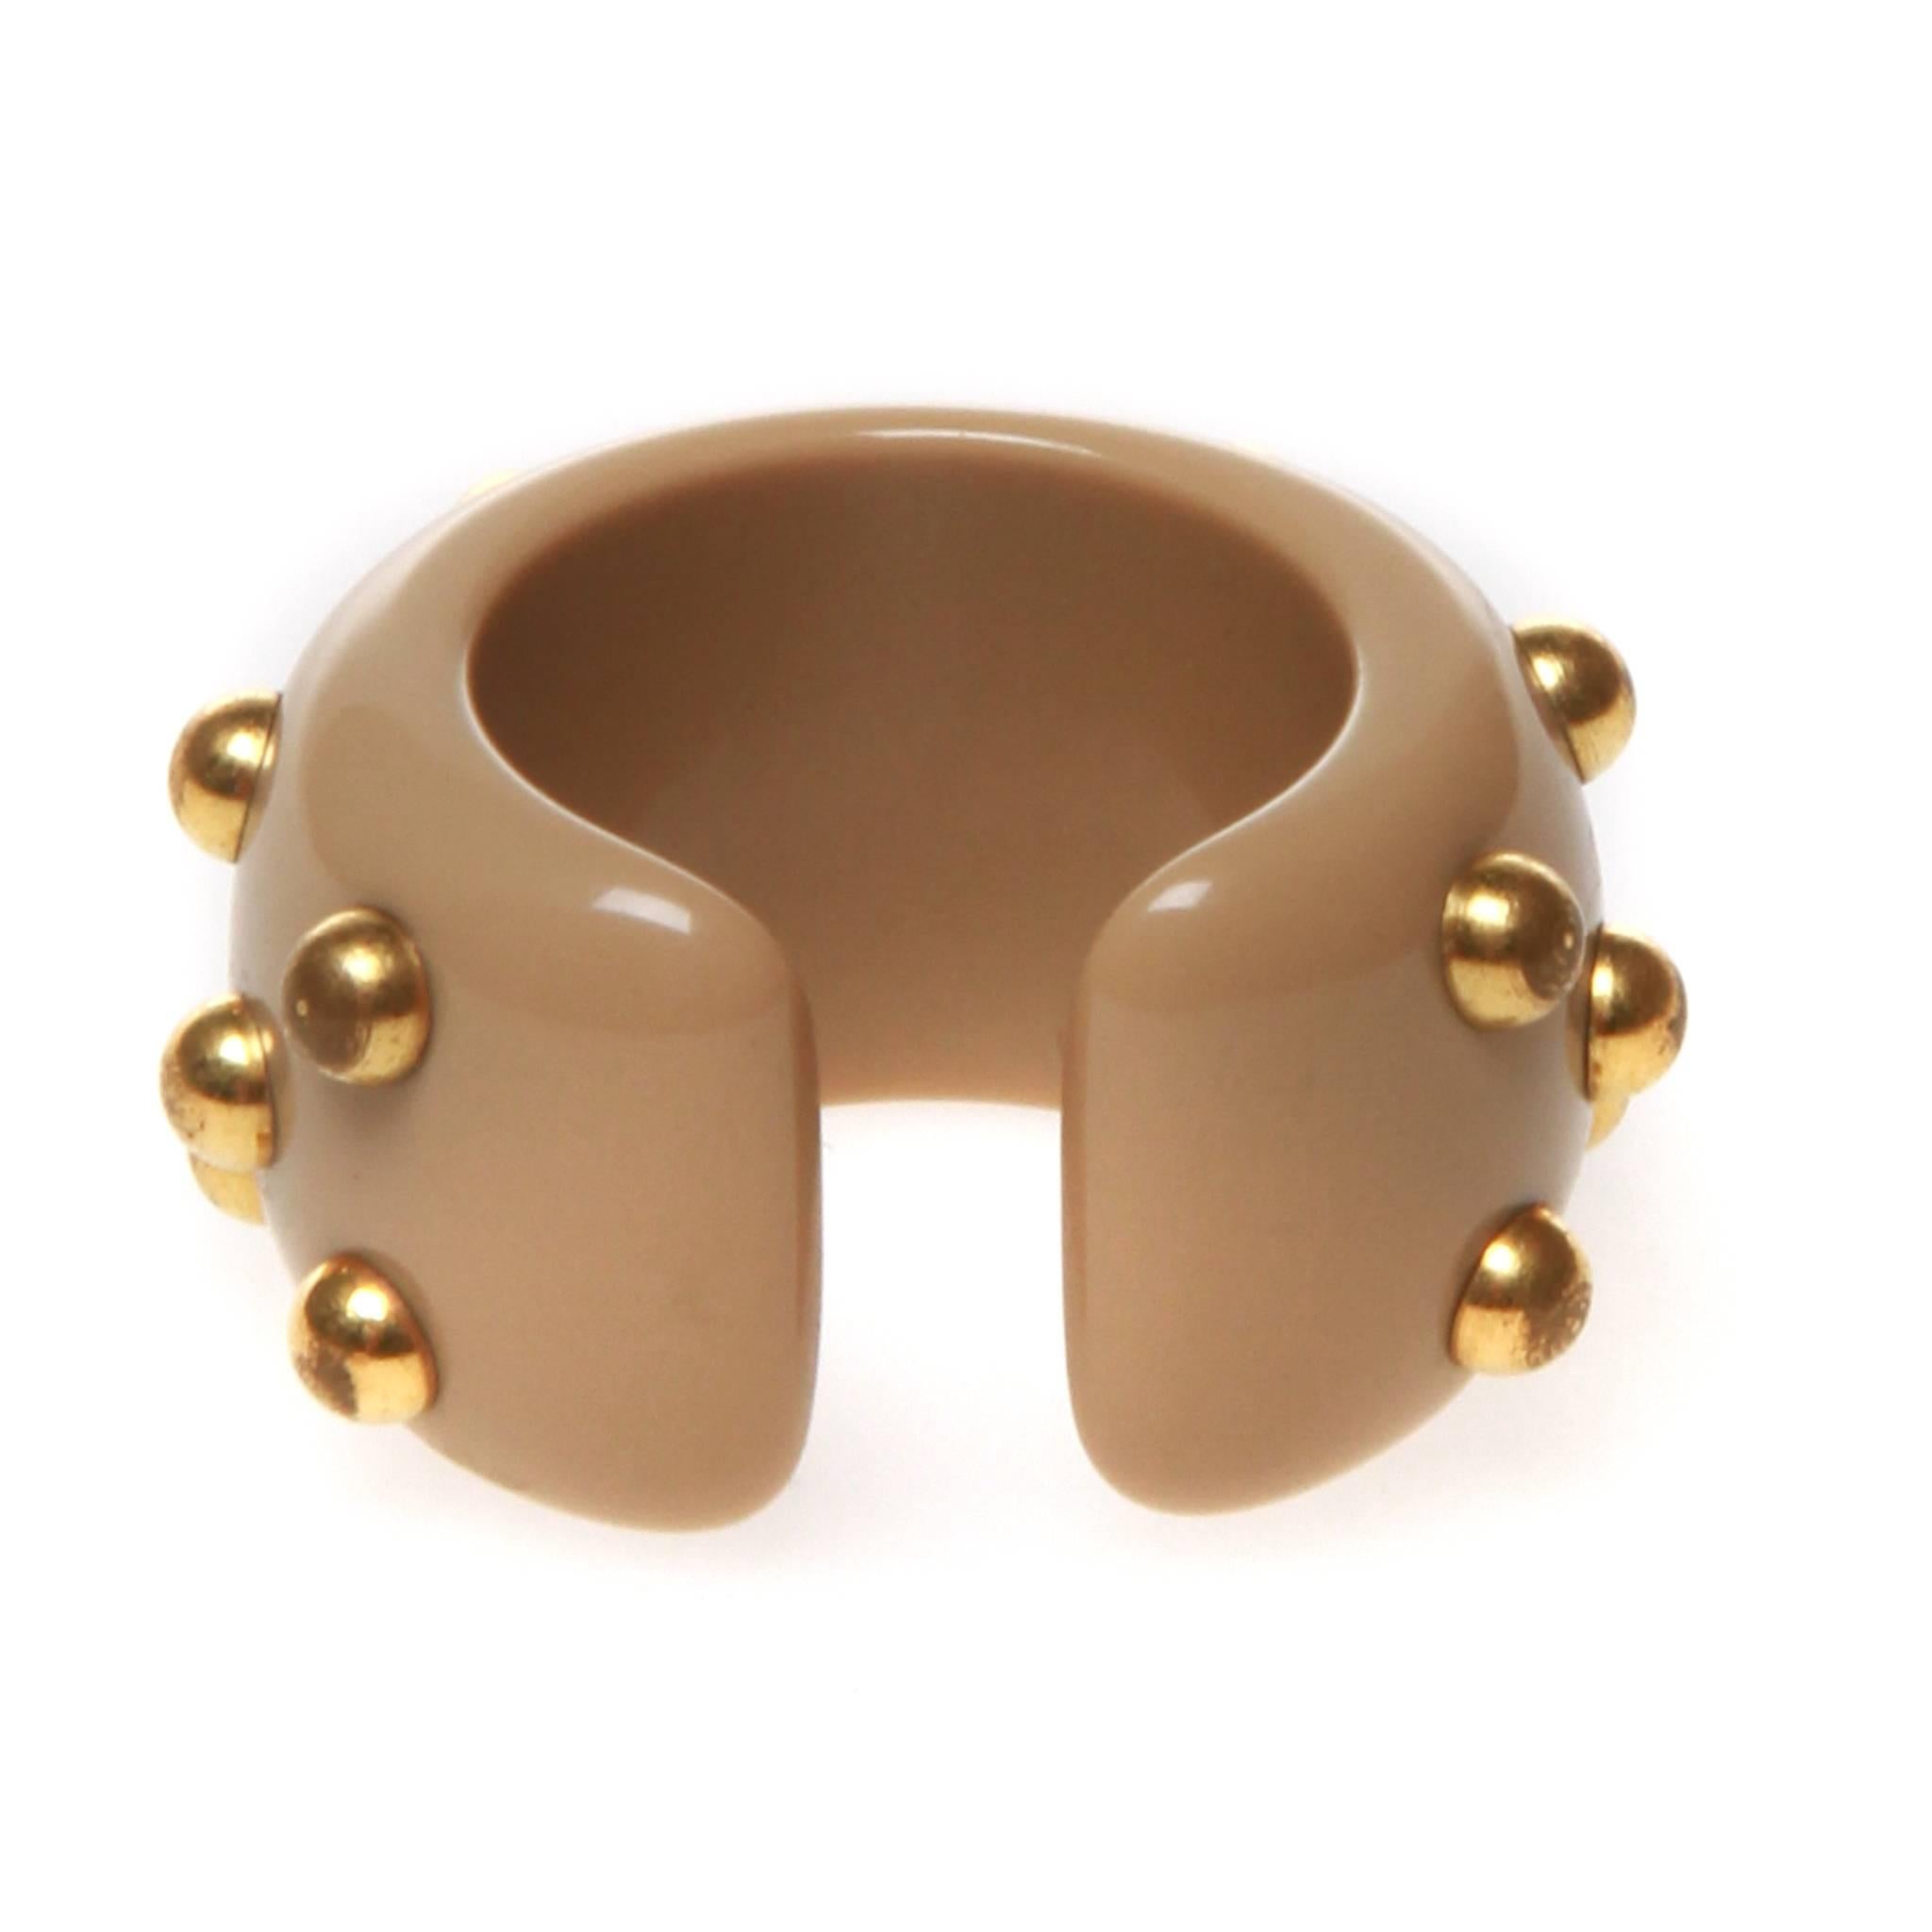 Chanel Studded Ring In Excellent Condition For Sale In Melbourne, Victoria